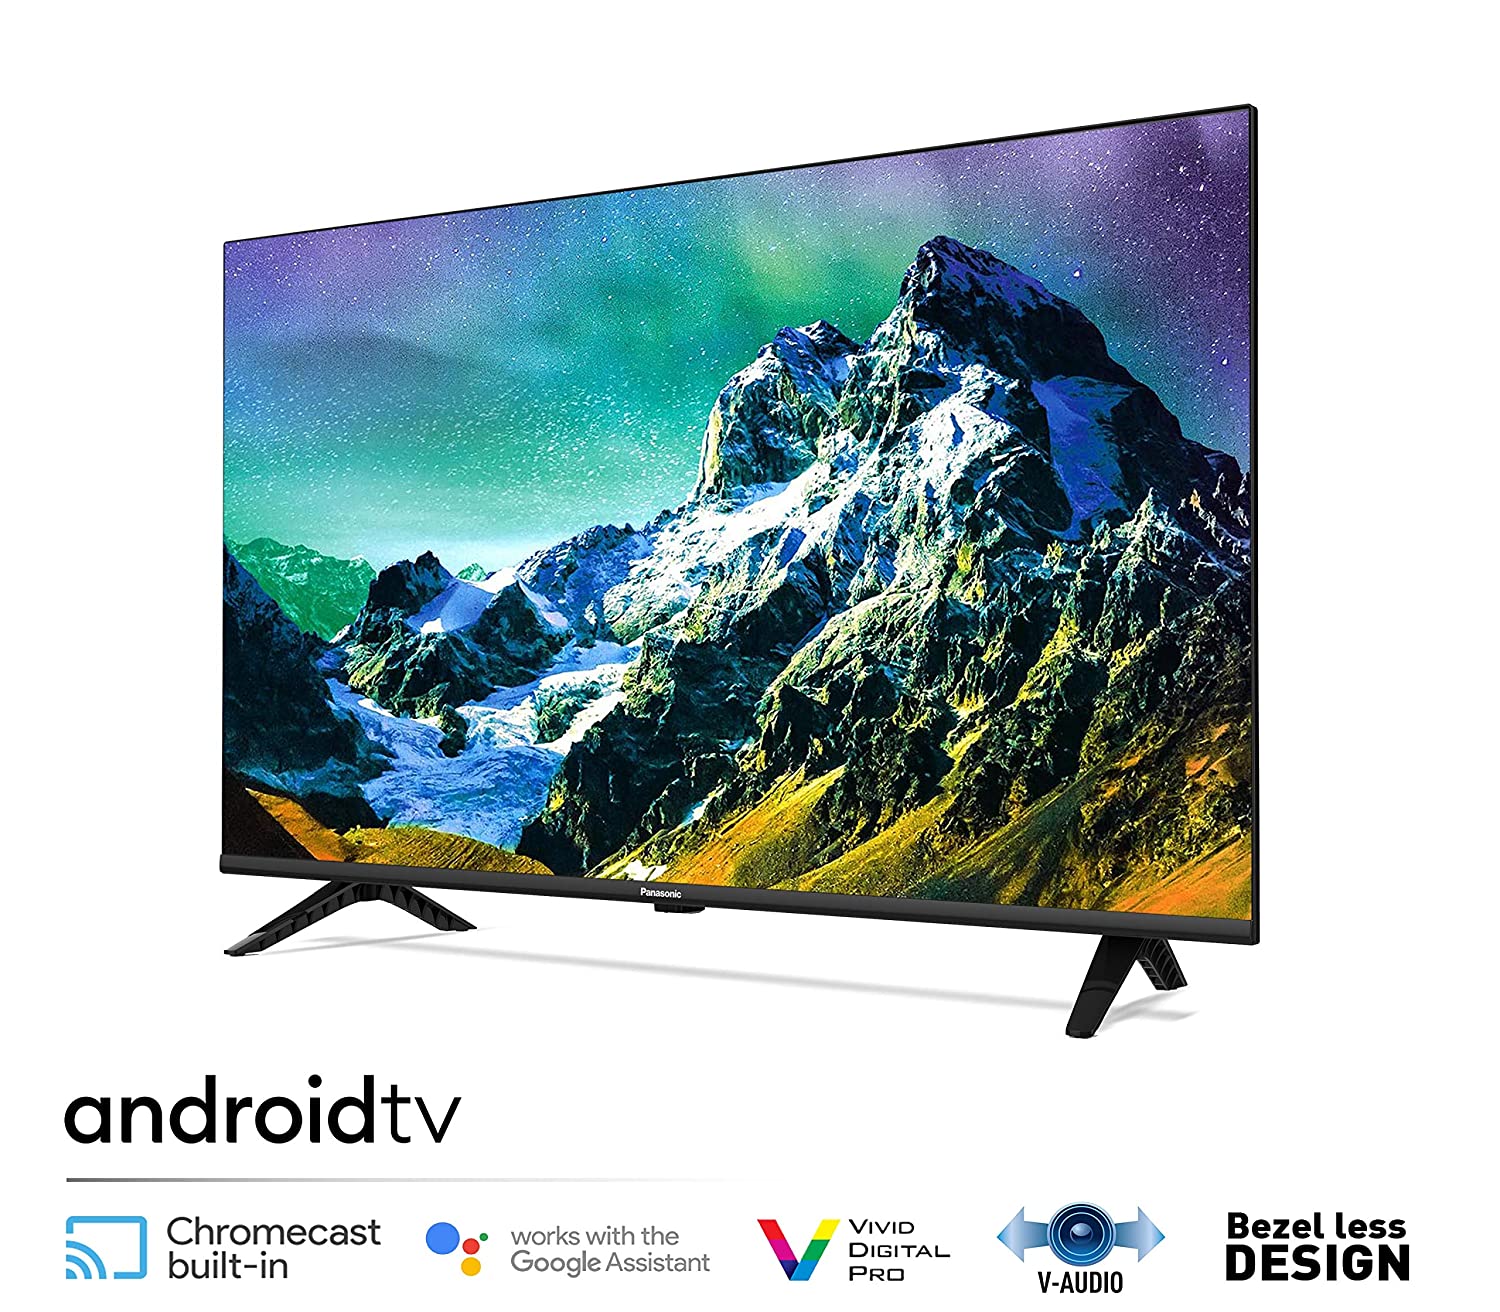 Panasonic 100 cm (40 inch) Full HD LED Smart Android TV  (TH-40HS450DX)